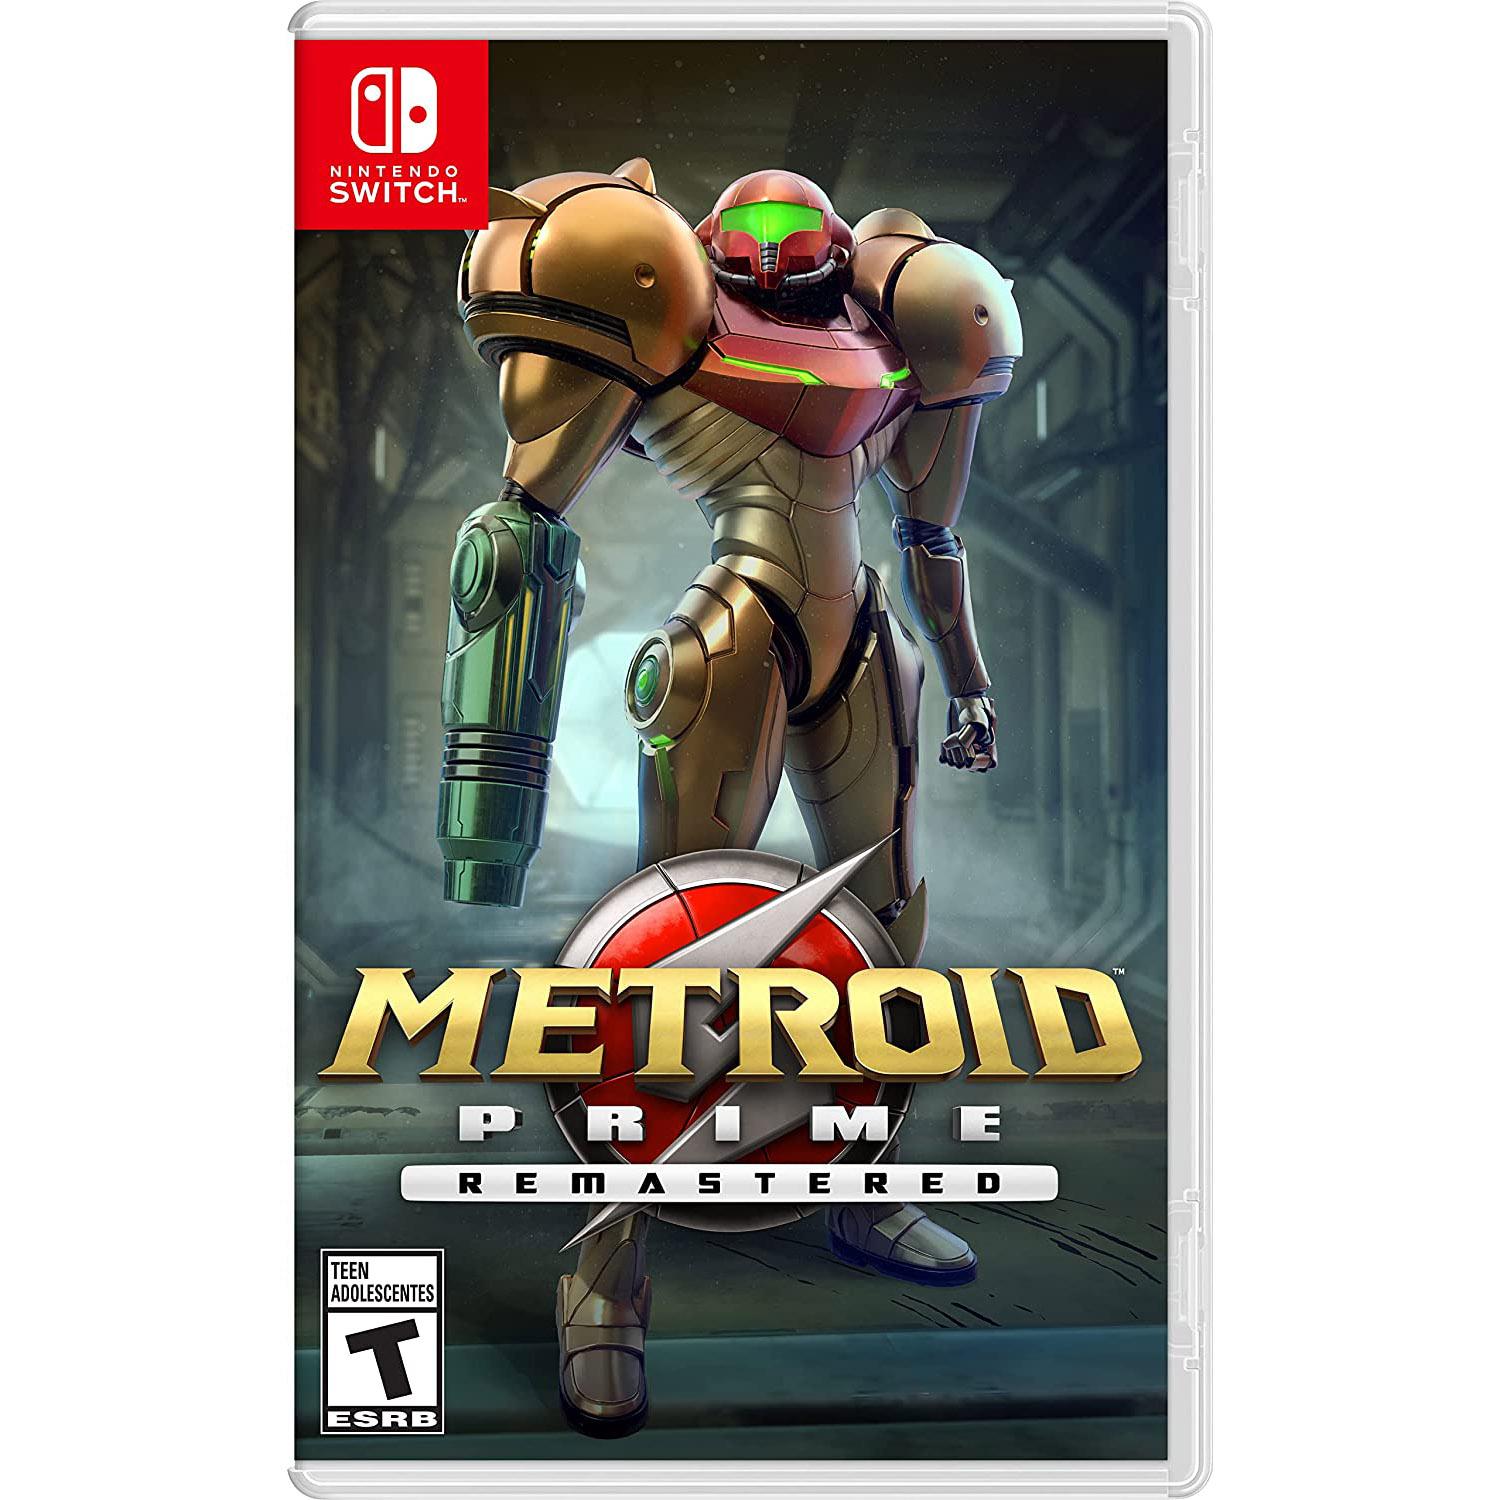 Metroid Prime Remastered Nintendo Switch for $39.99 Shipped